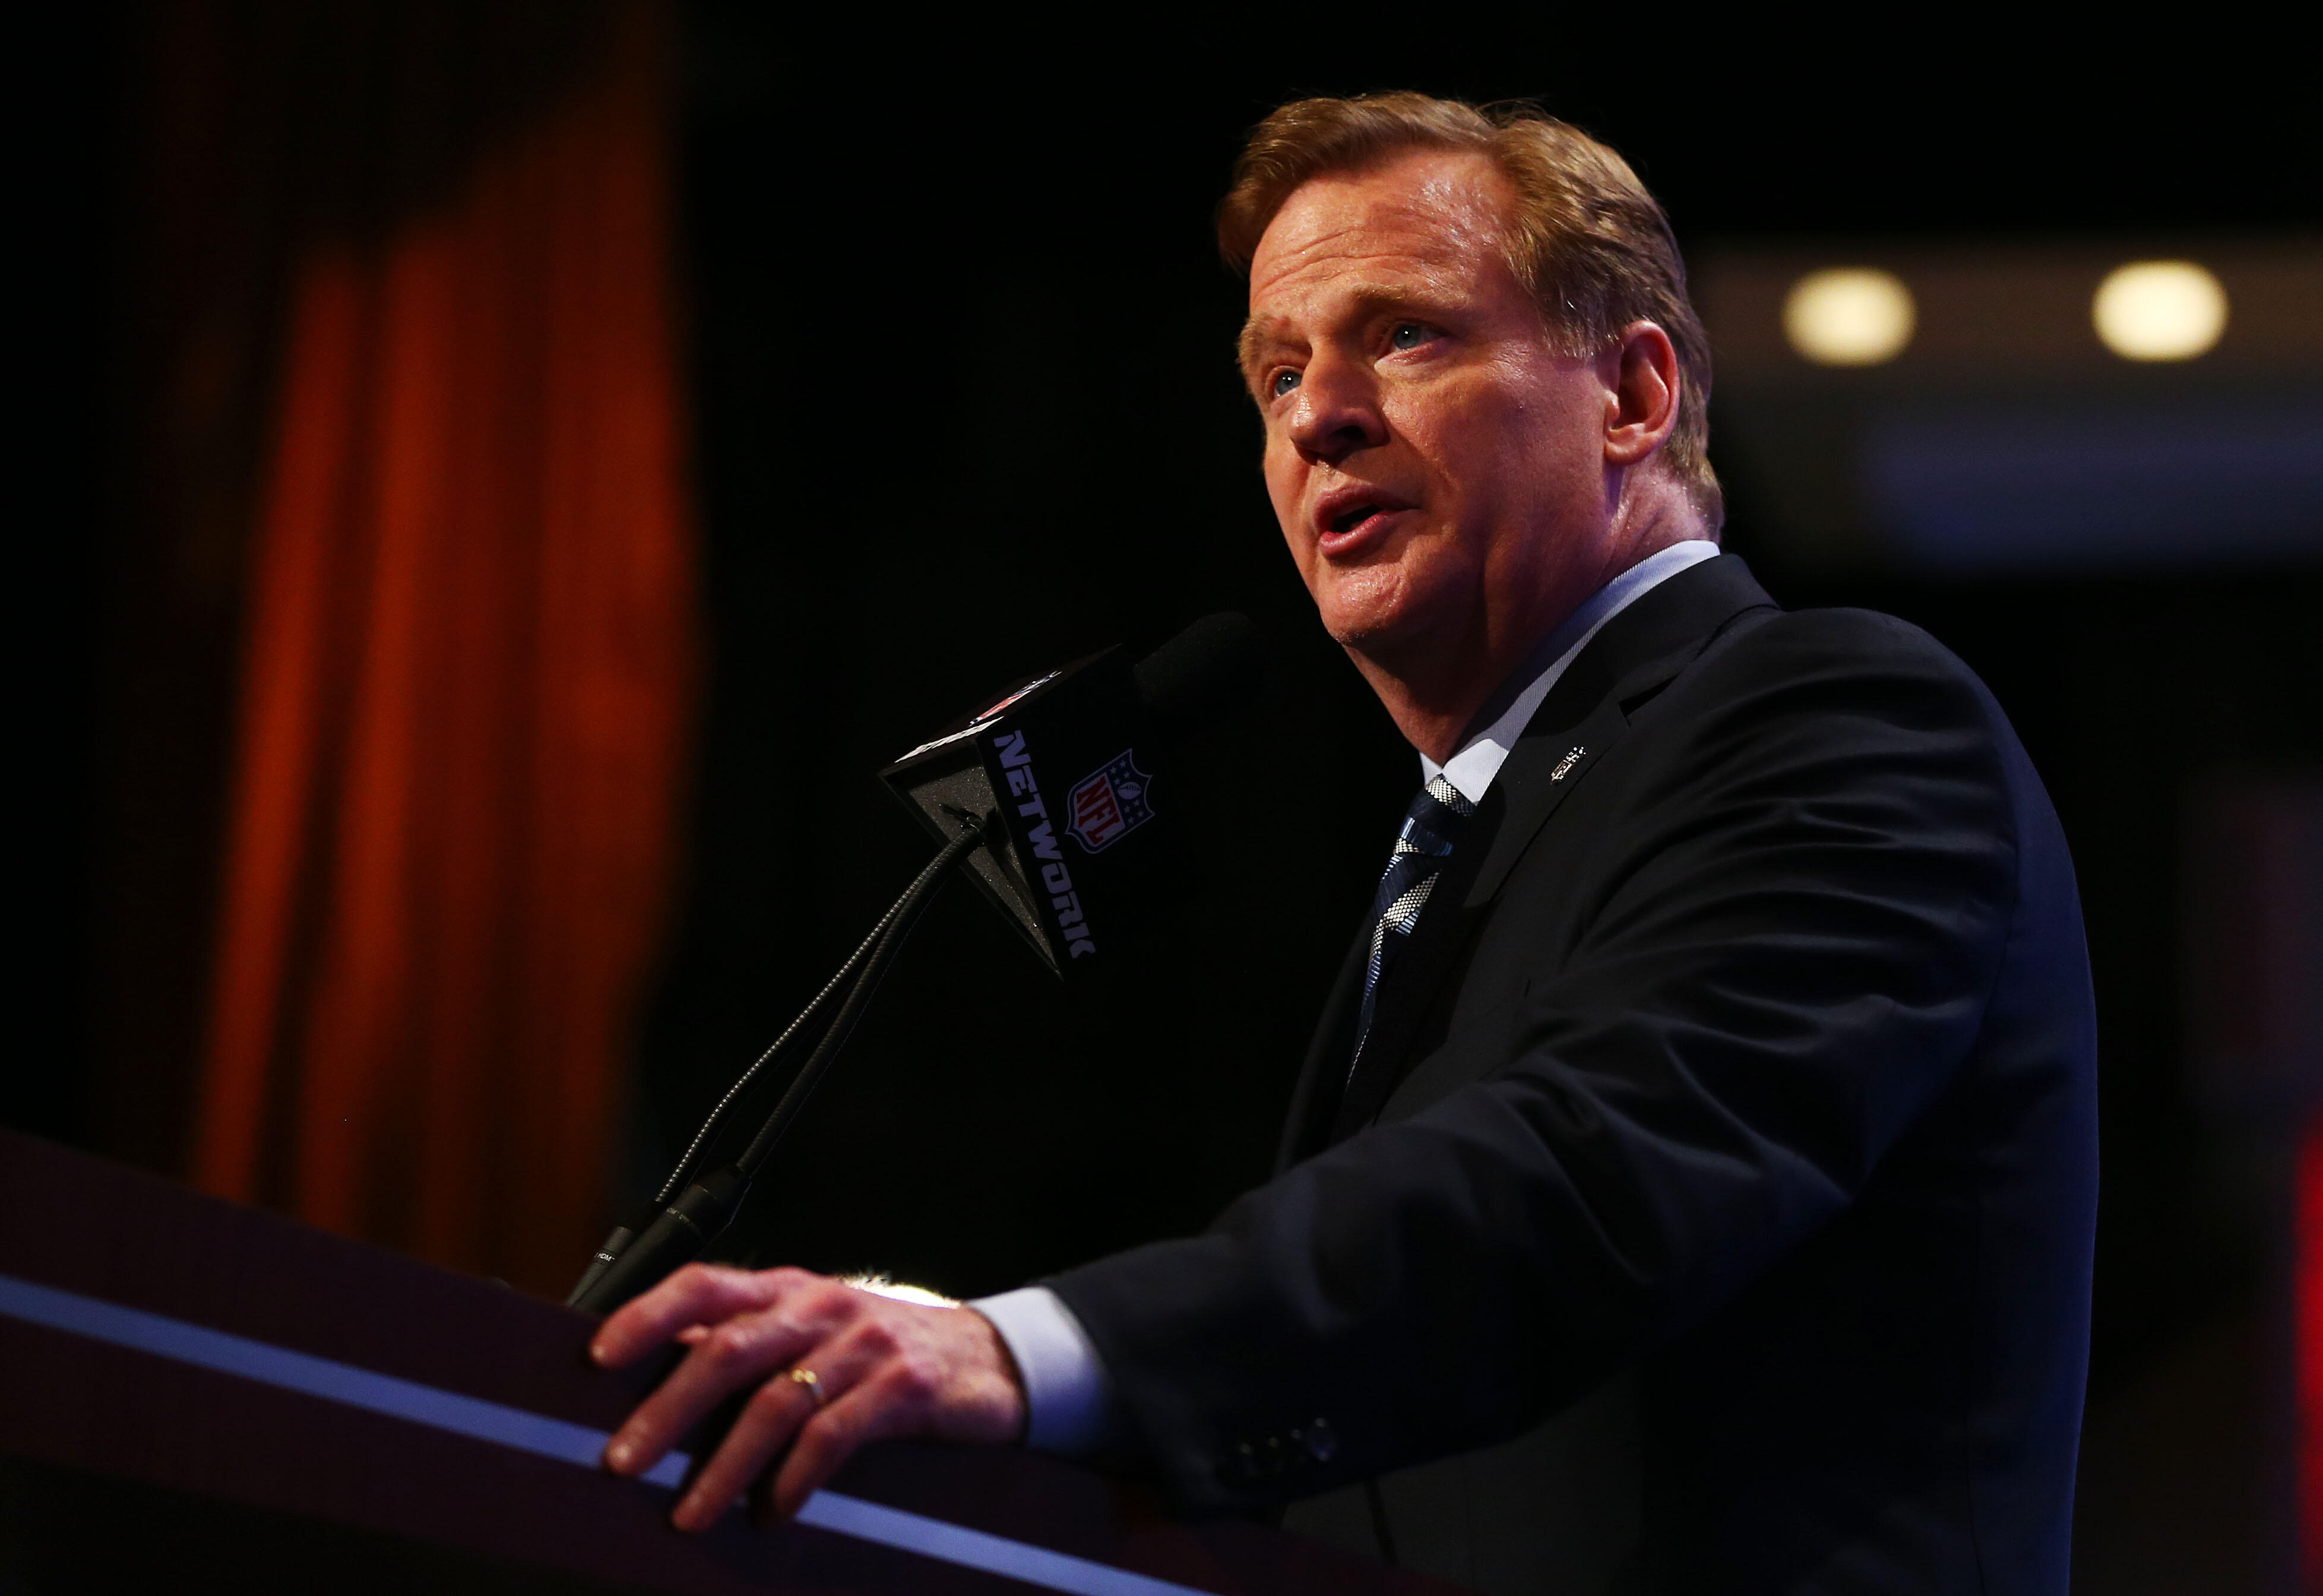 NEW YORK, NY - MAY 08:  NFL Commissioner Roger Goodell speaks during the first round of the 2014 NFL Draft at Radio City Music Hall on May 8, 2014 in New York City.  (Photo by Elsa/Getty Images)